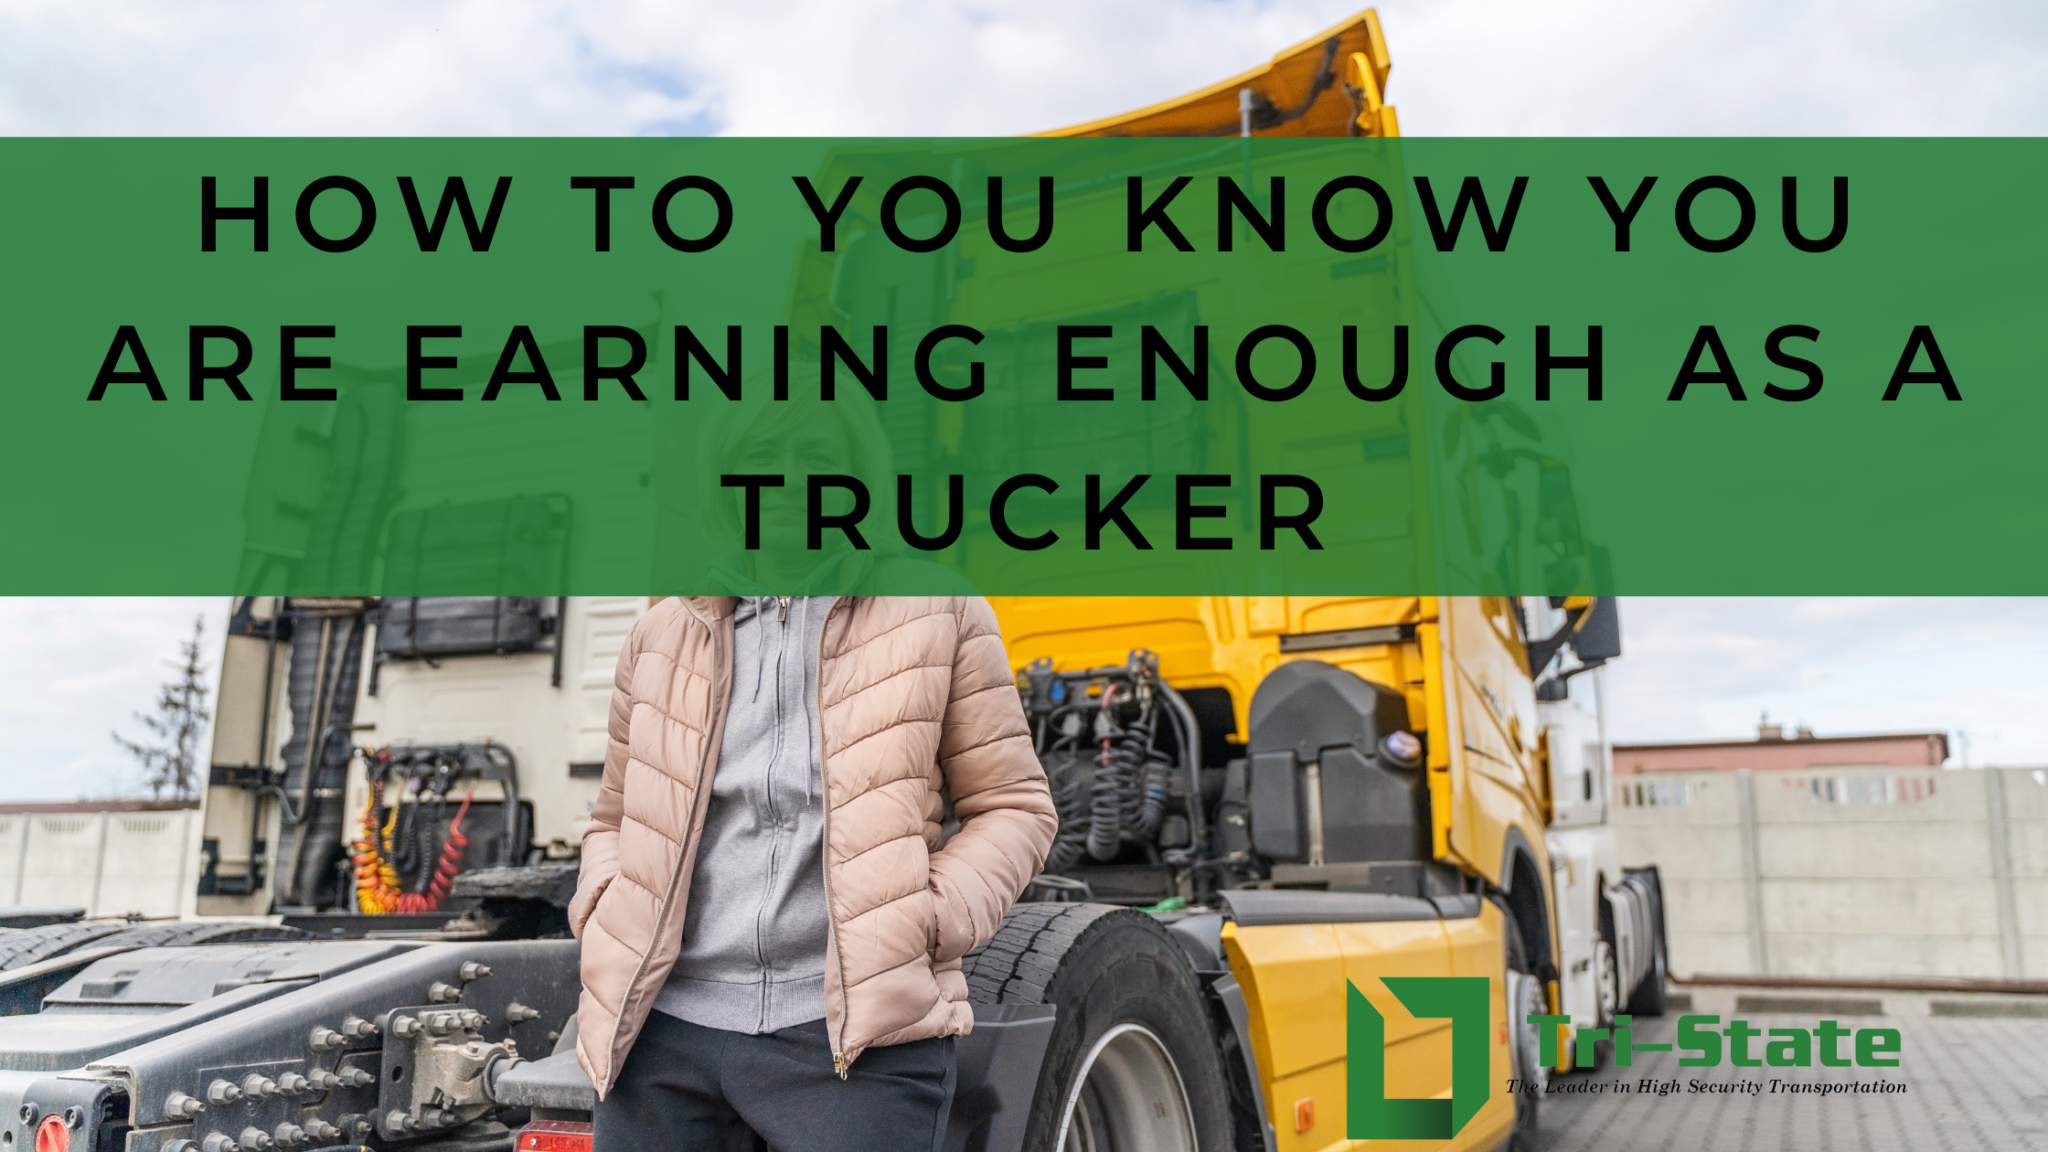 How To You Know If You Are Earning Enough as a Trucker